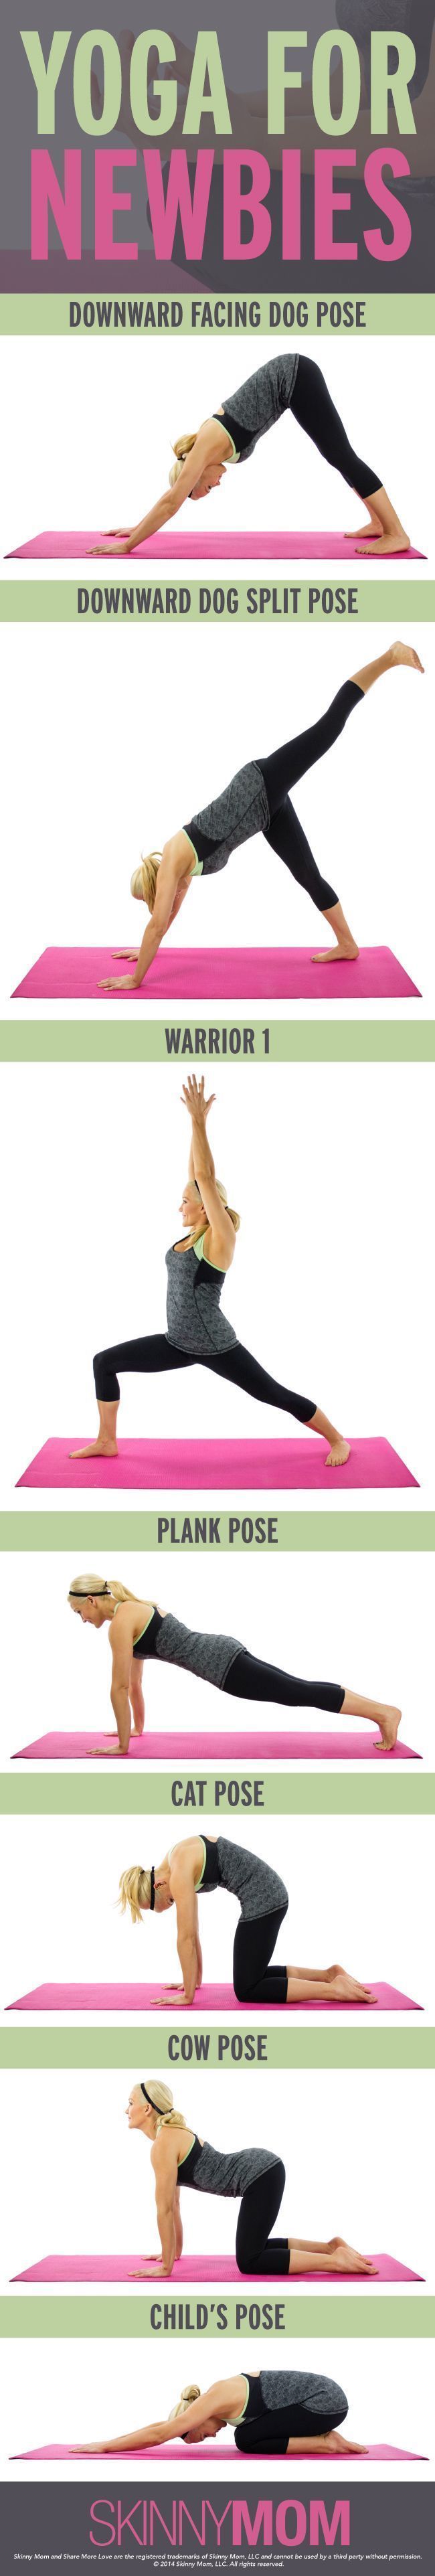 Yoga For Newbies!  Come to Clarkston Hot Yoga in Clarkston, MI for all of your Y...